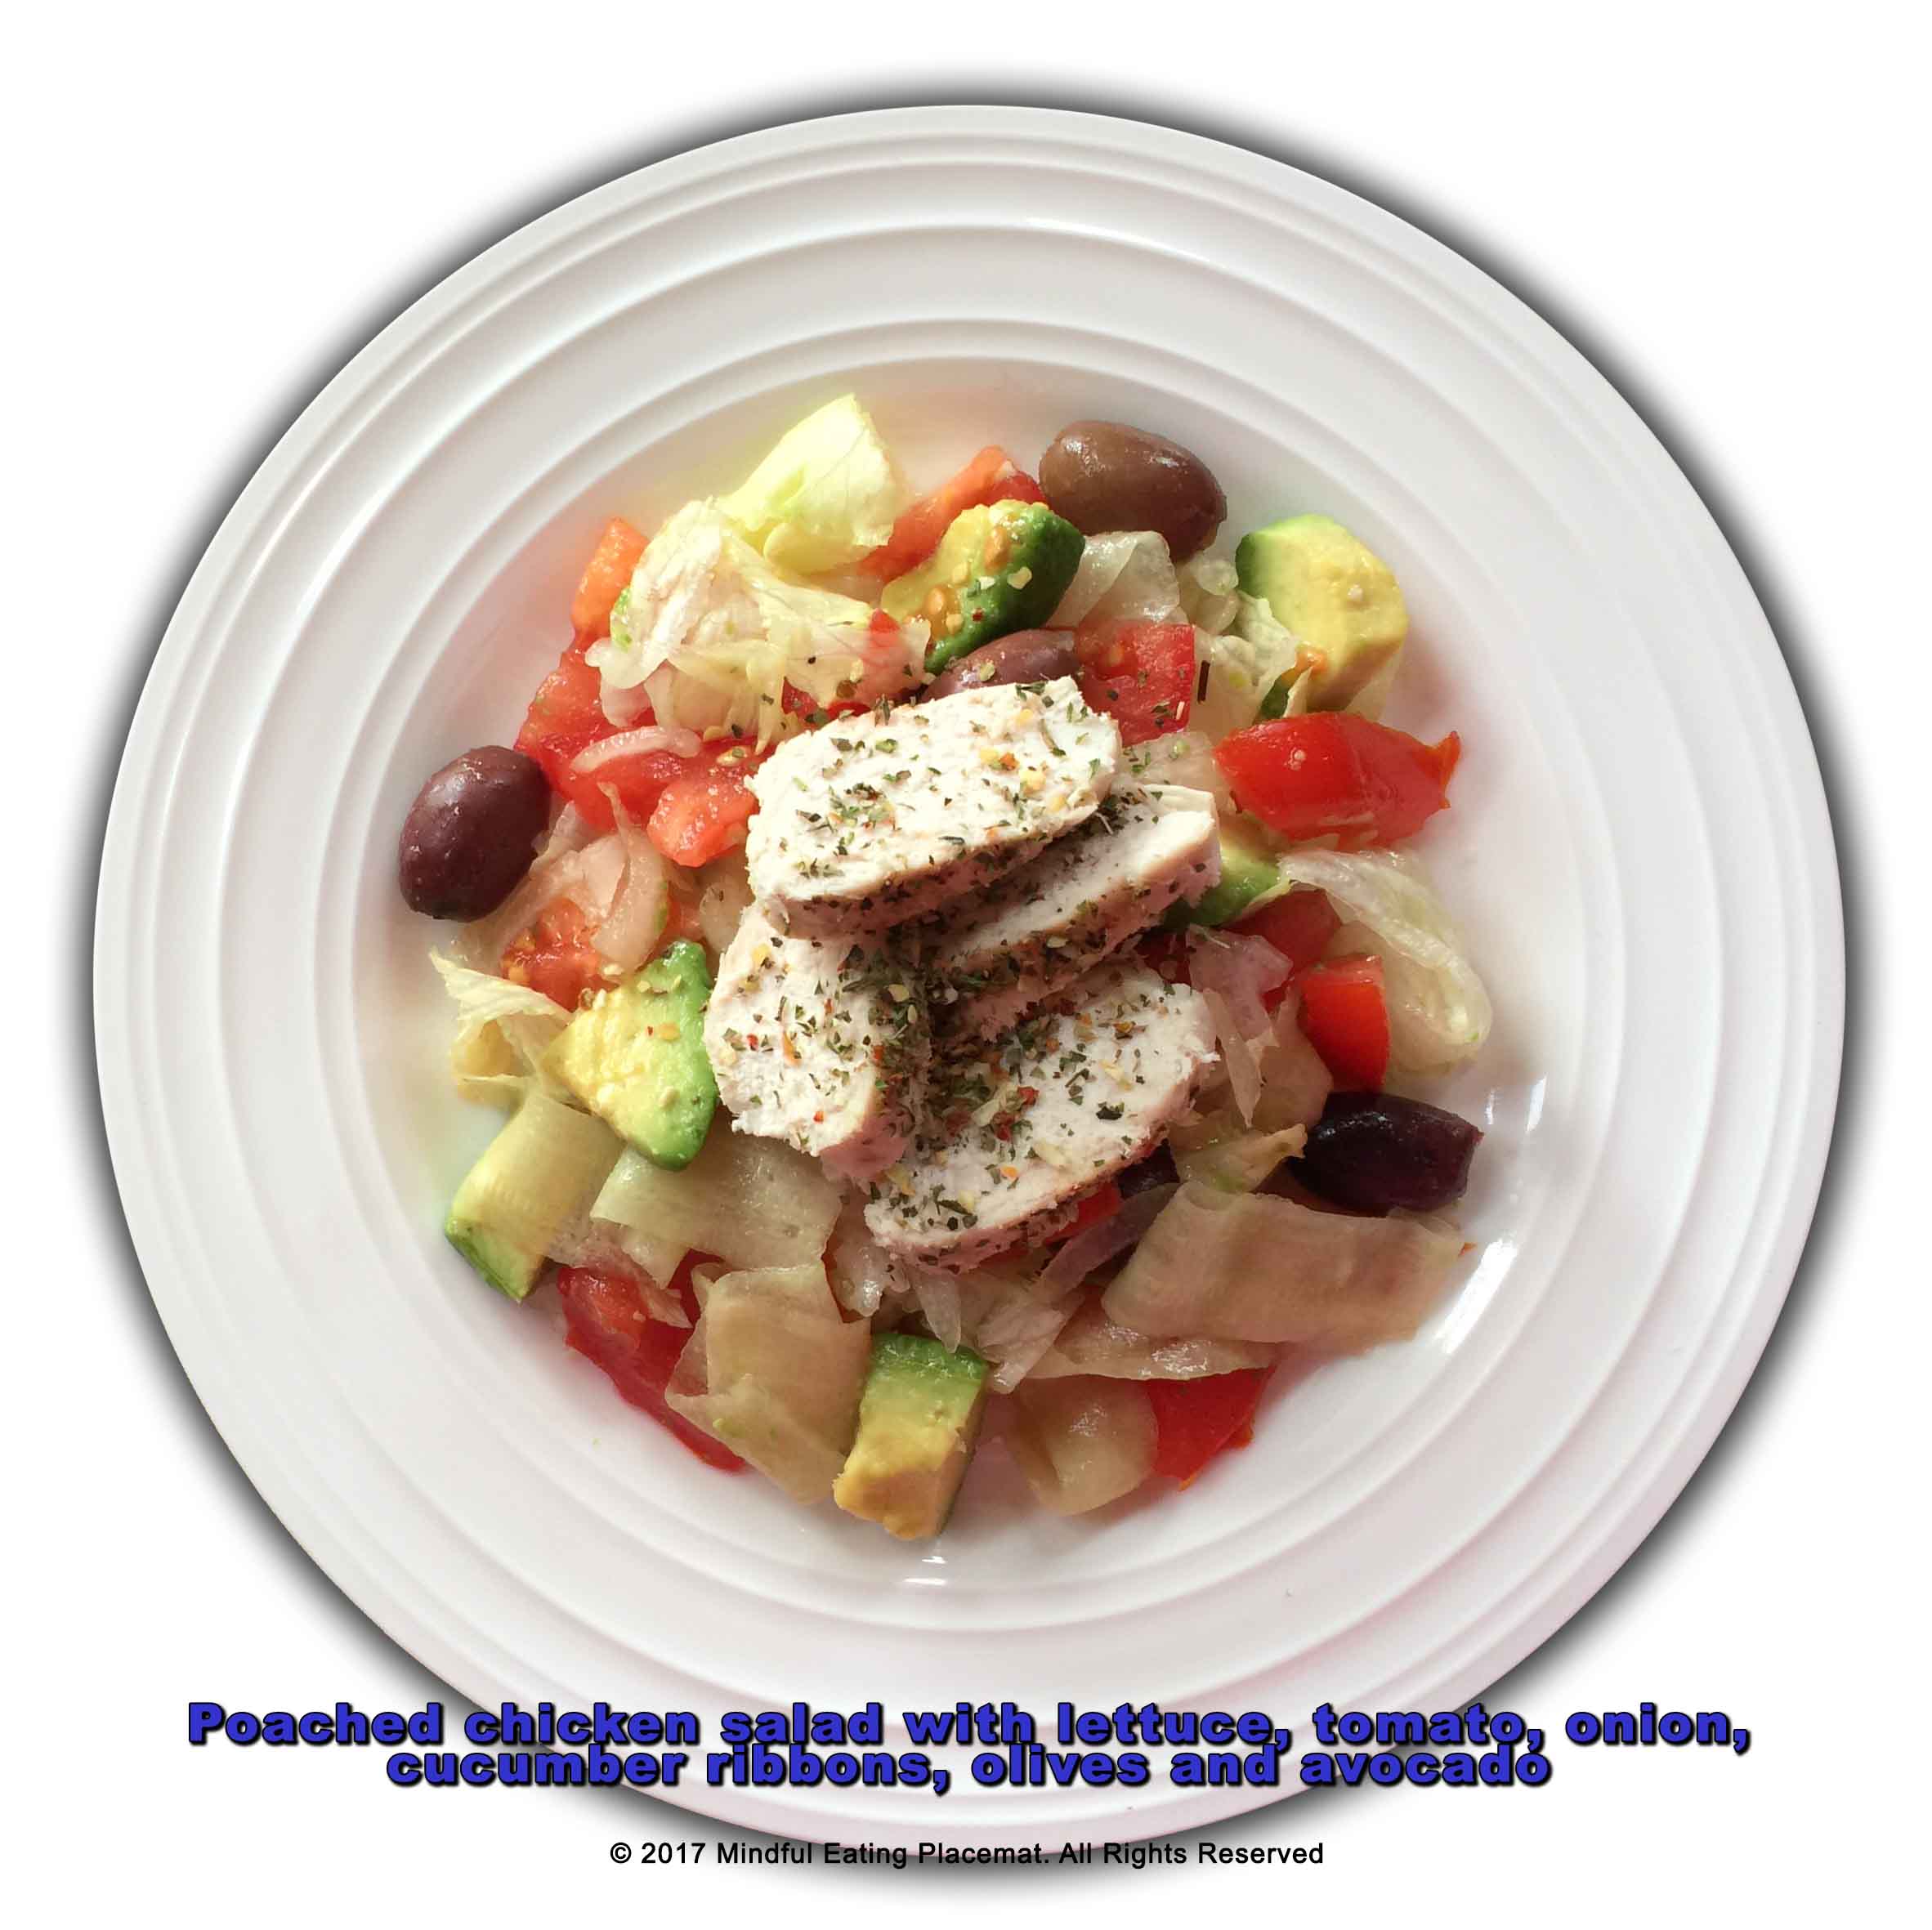 Poached chicken salad with lettuce, tomato, onion, cucumber ribbons olives and avocado